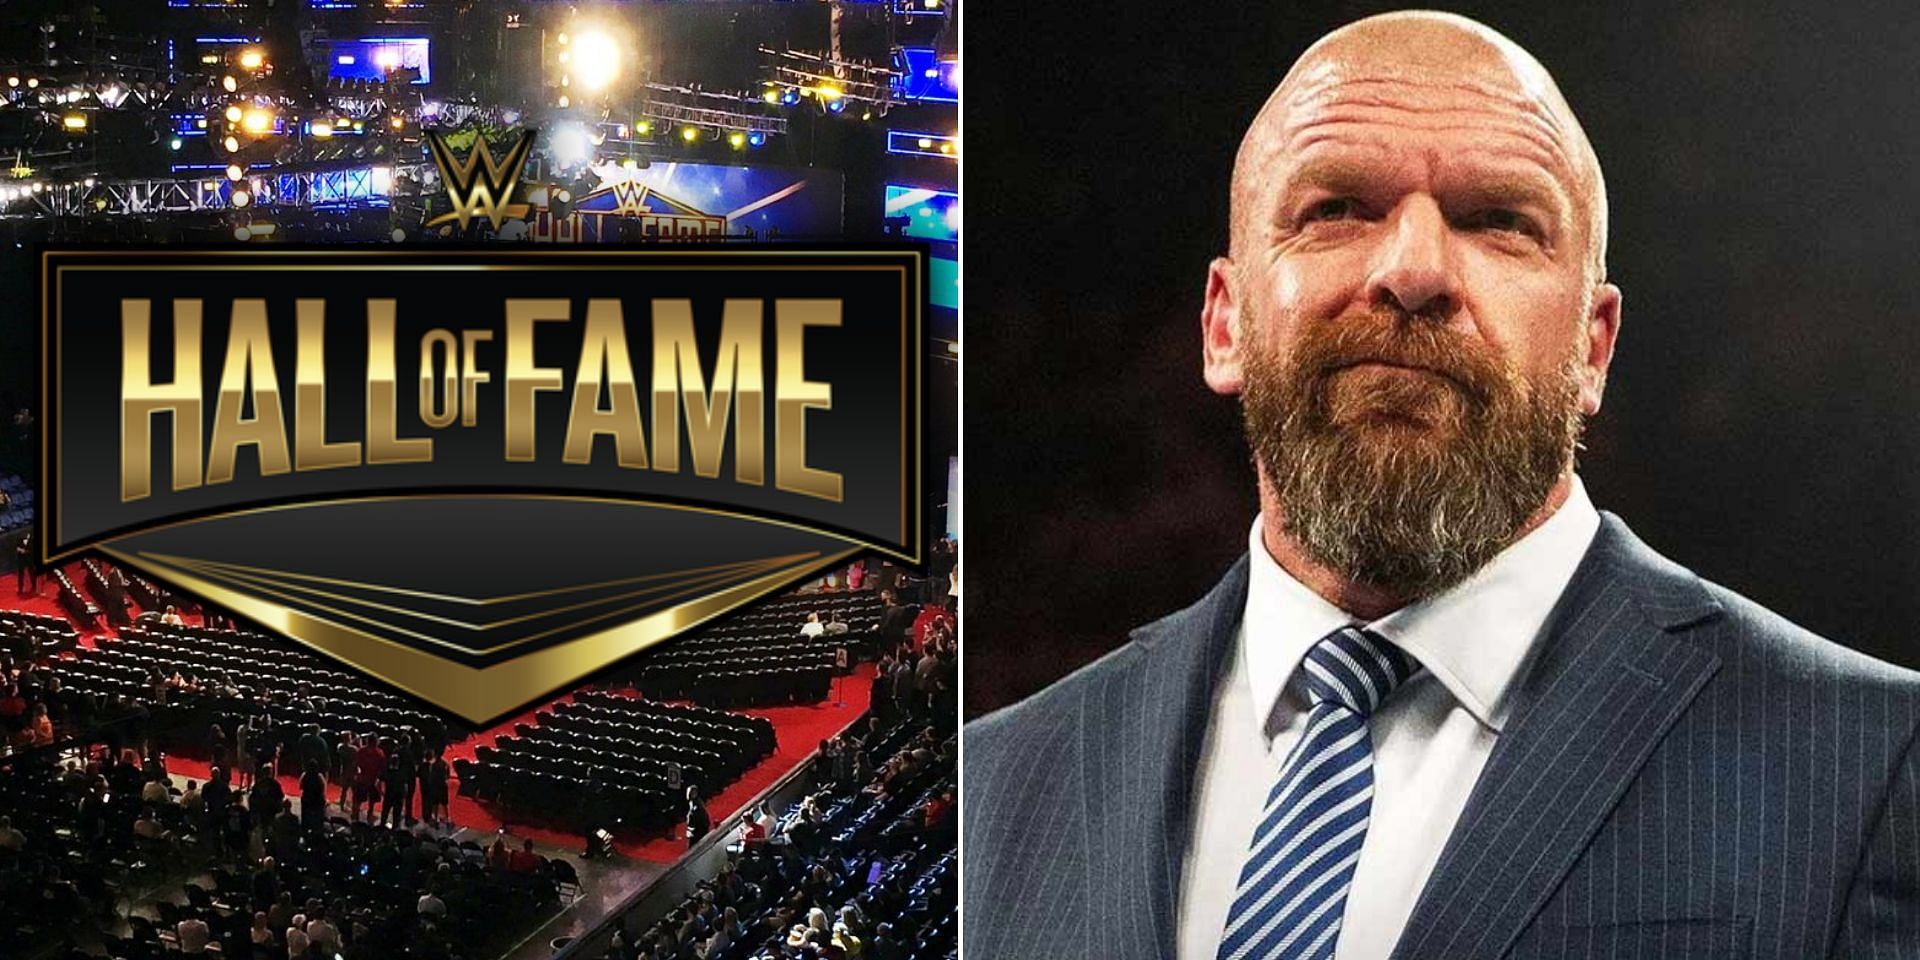 Triple H congratulated this WWE Hall of Famer